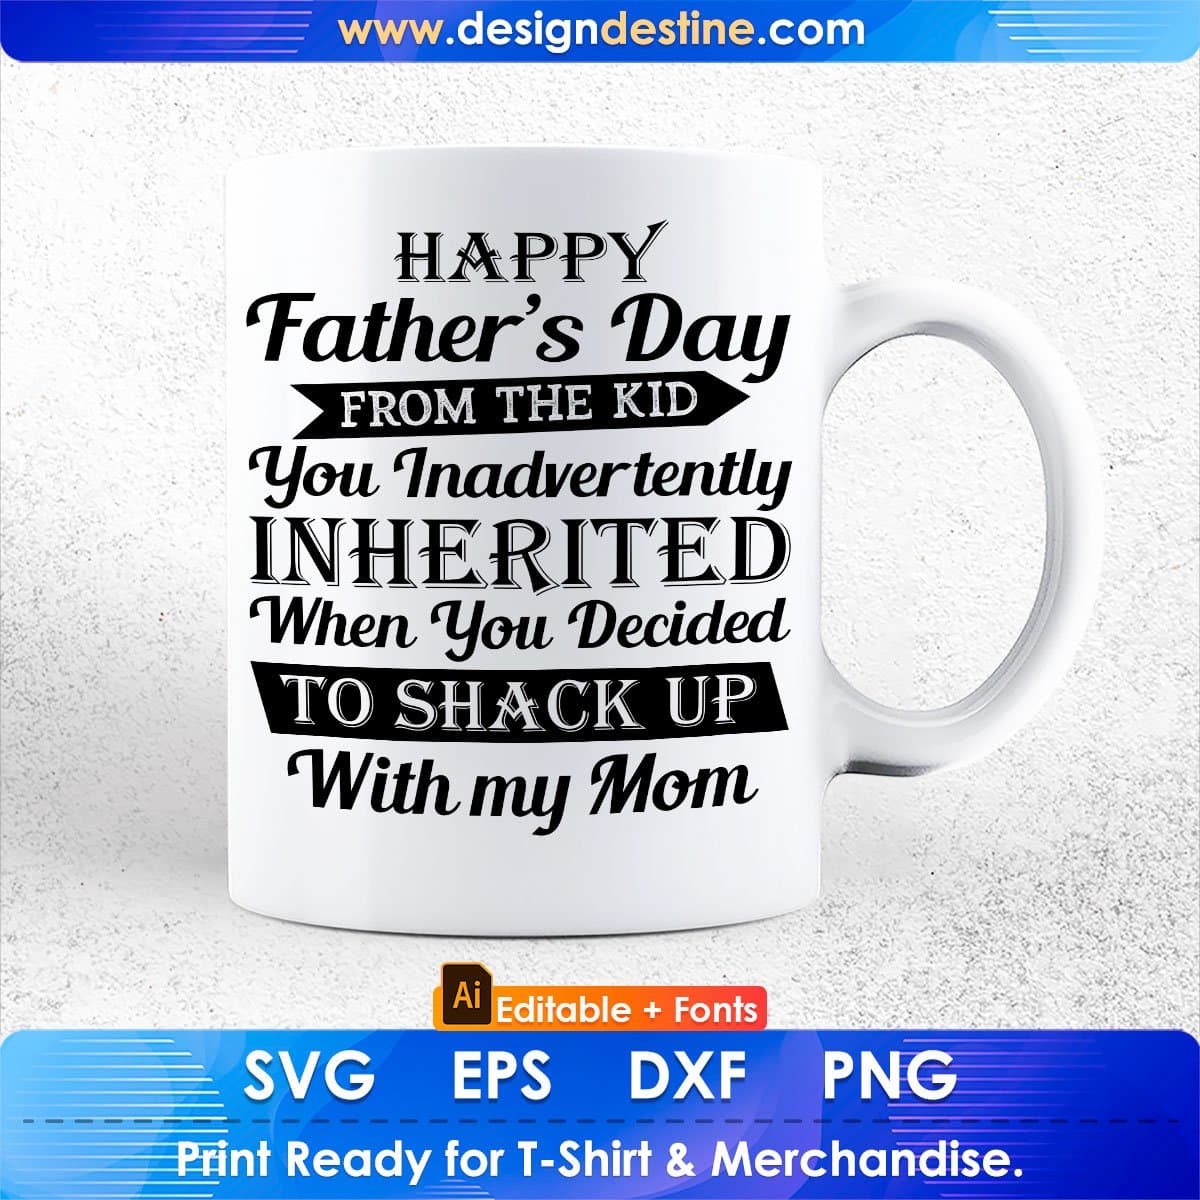 Happy Father's Day from The Kid Inherited Inadvertently Shack up Mom Editable T-shirt Design Svg Files